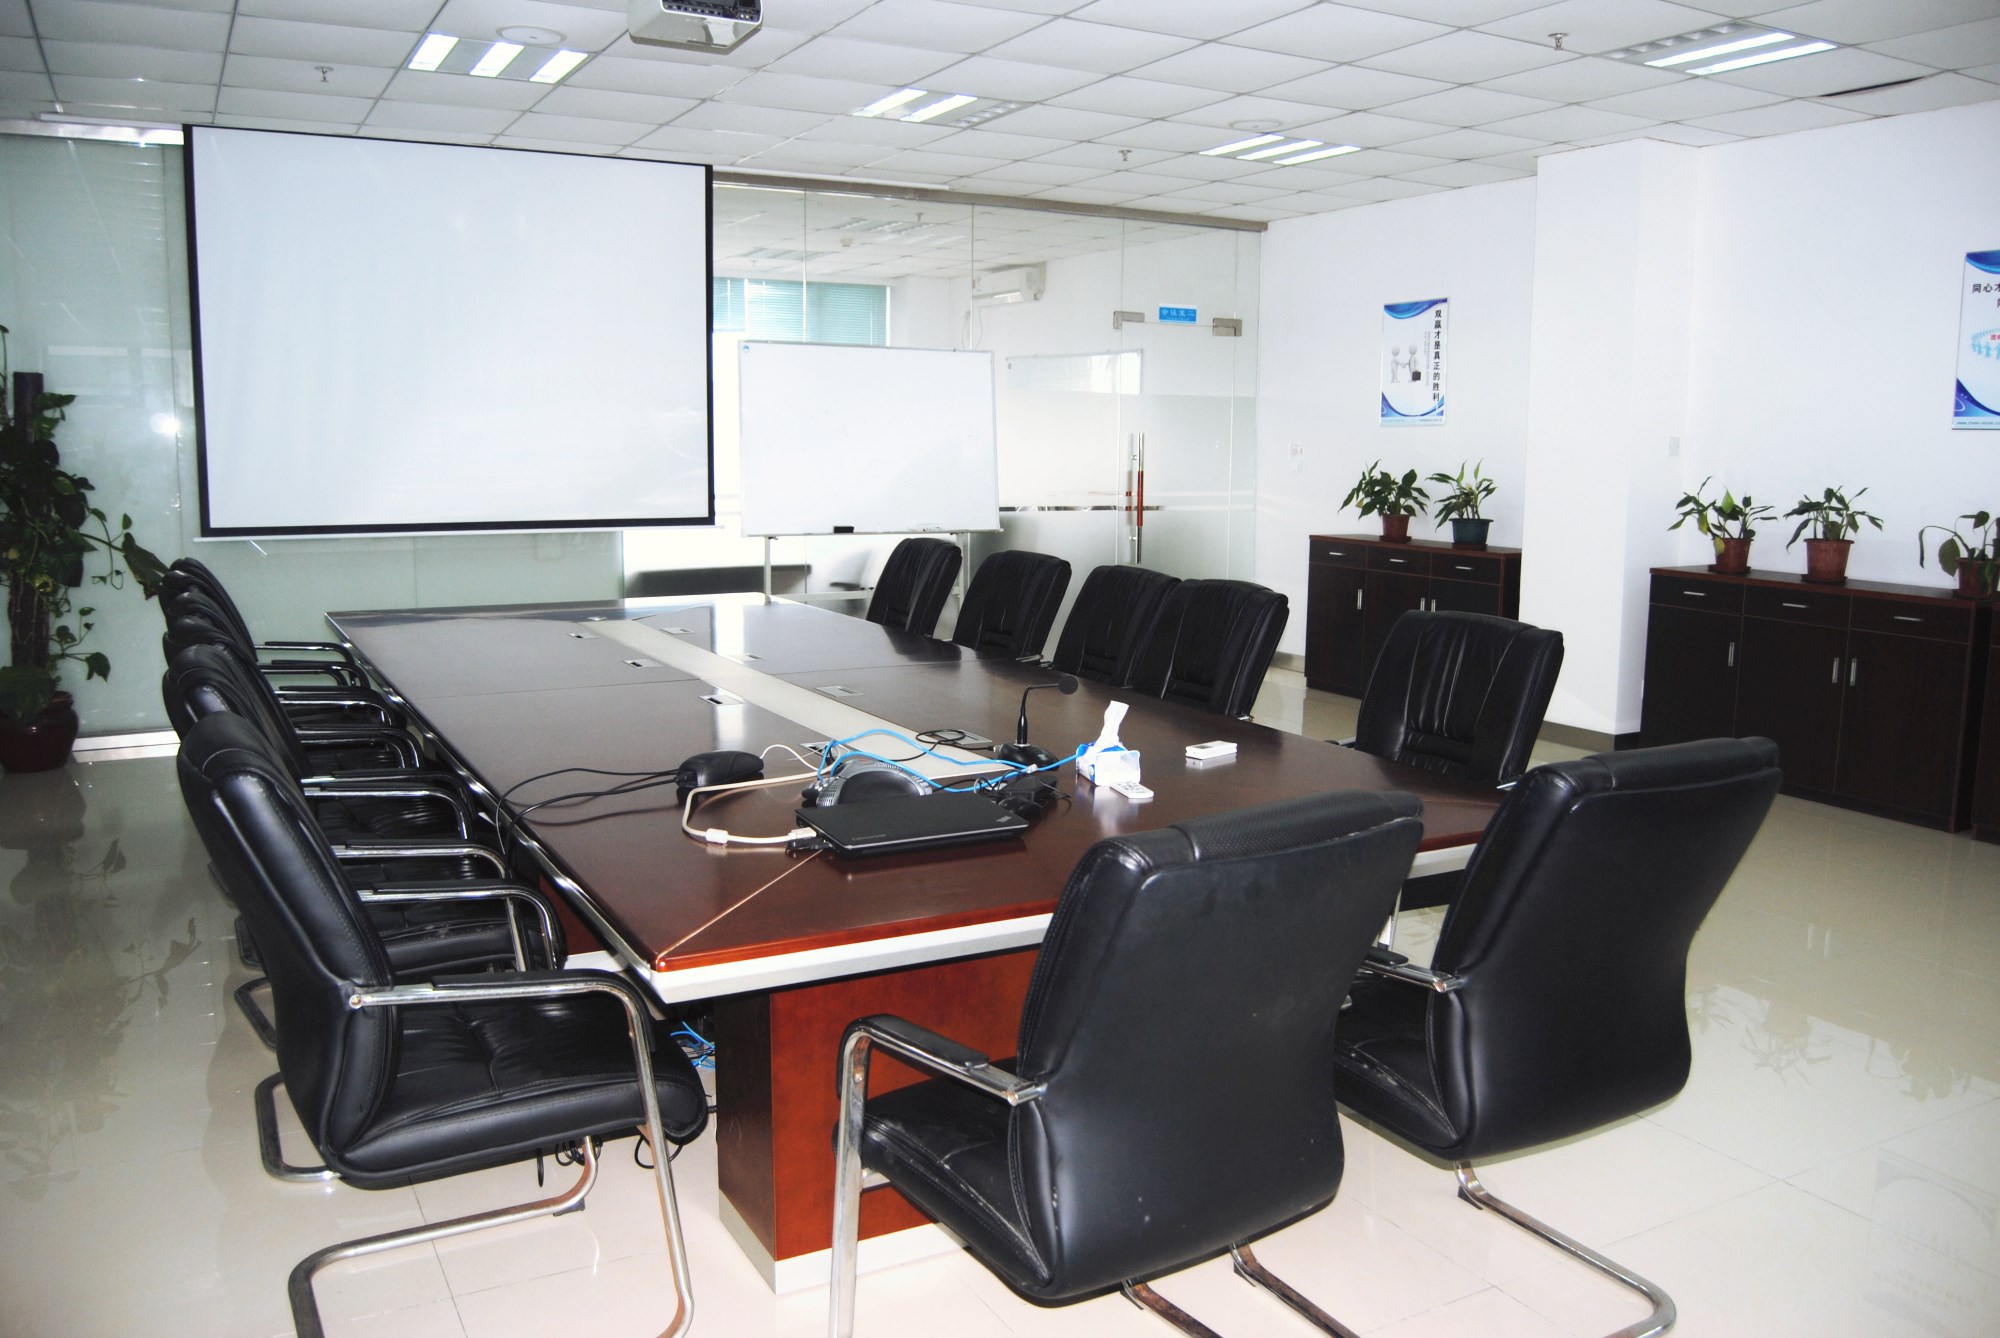  Conference Room